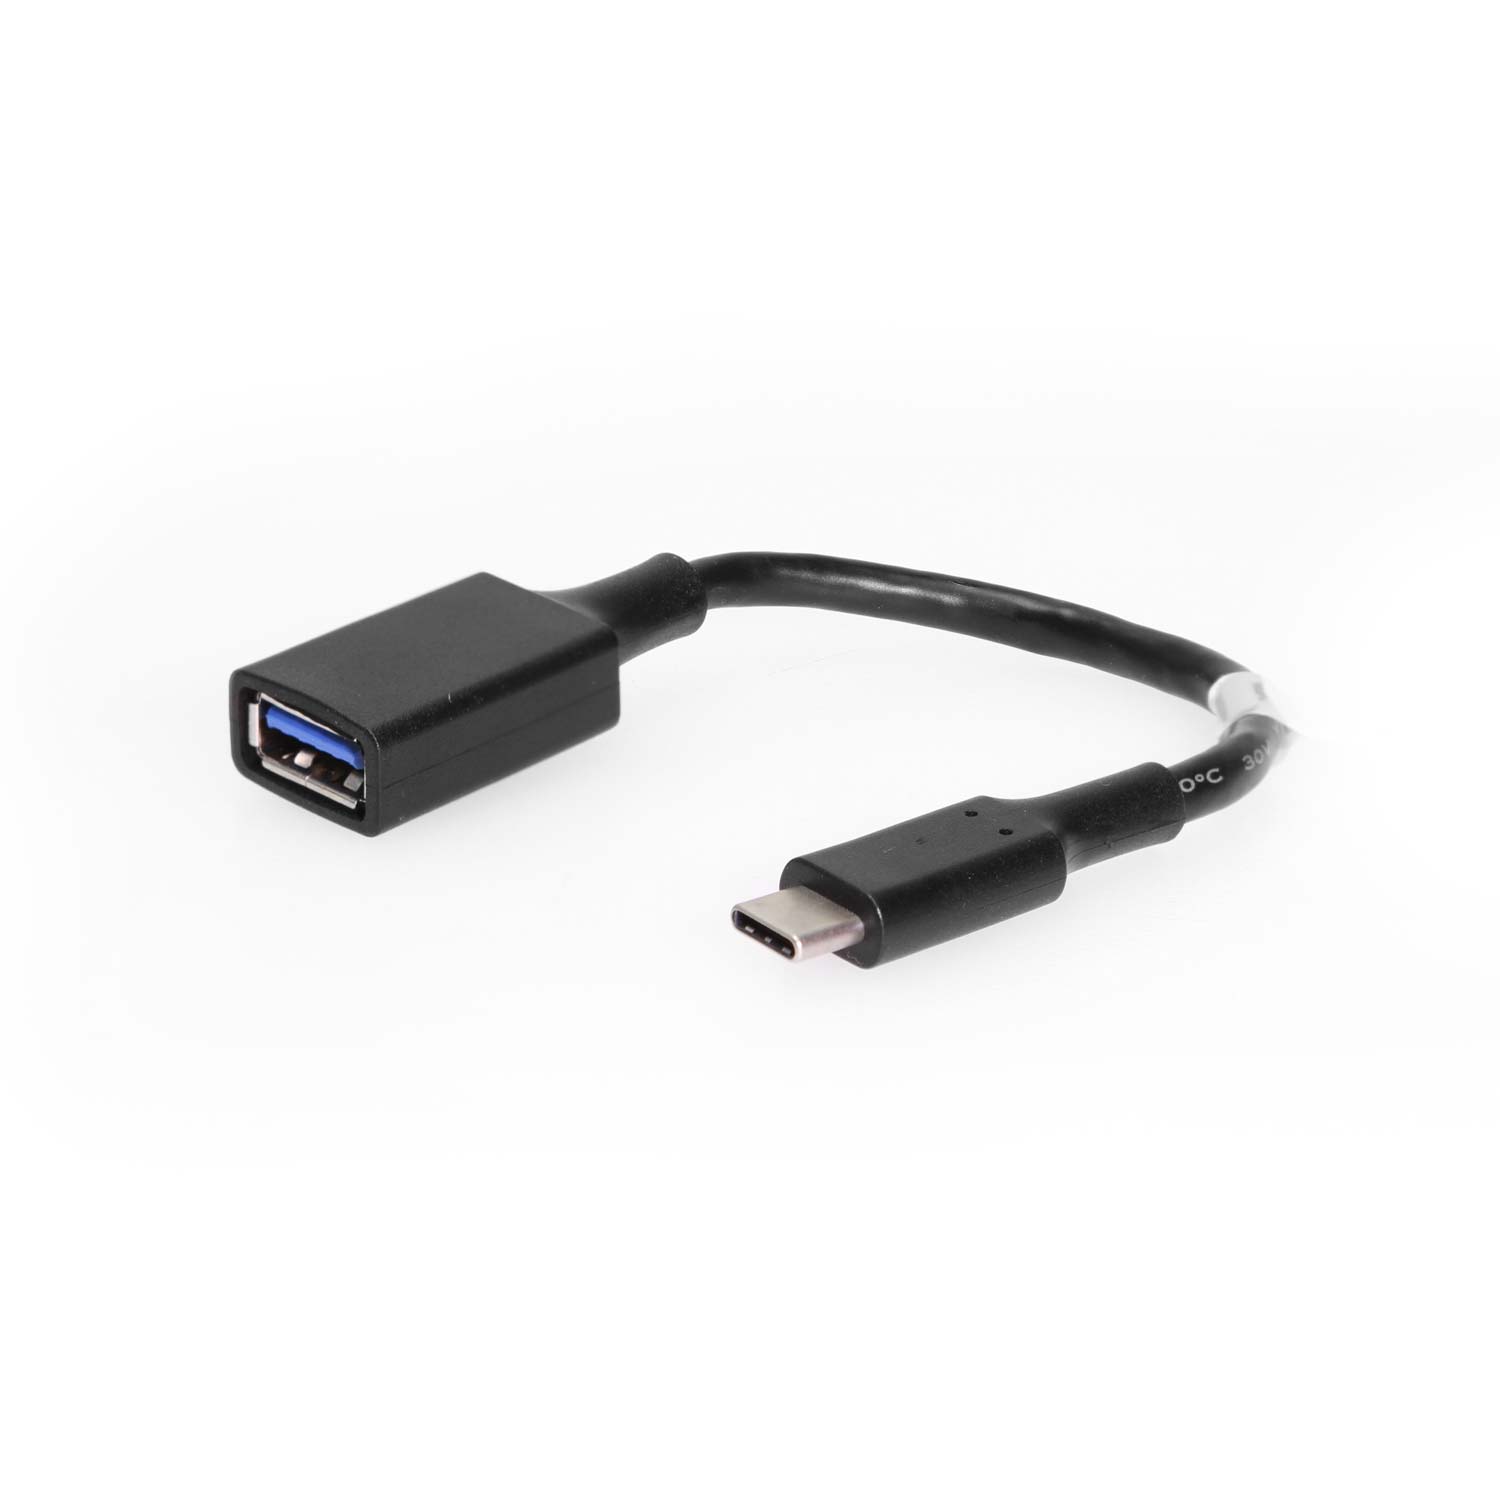 USB 3.2 Gen 1 Type-C Male to Type-A Female Adapter Cable